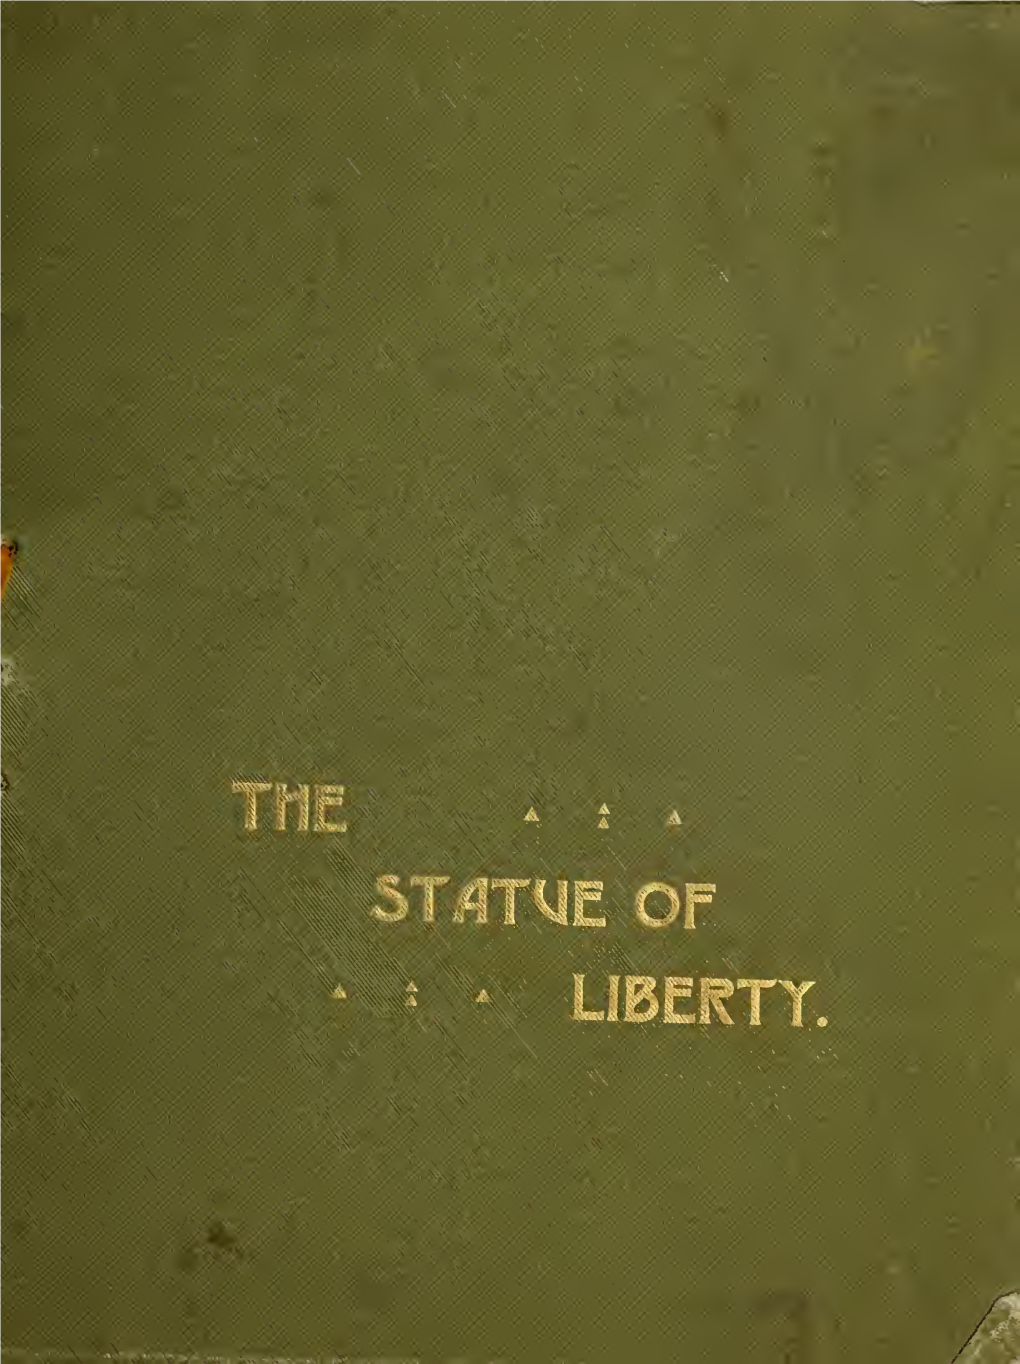 Statue of Liberty Indelible Photographs